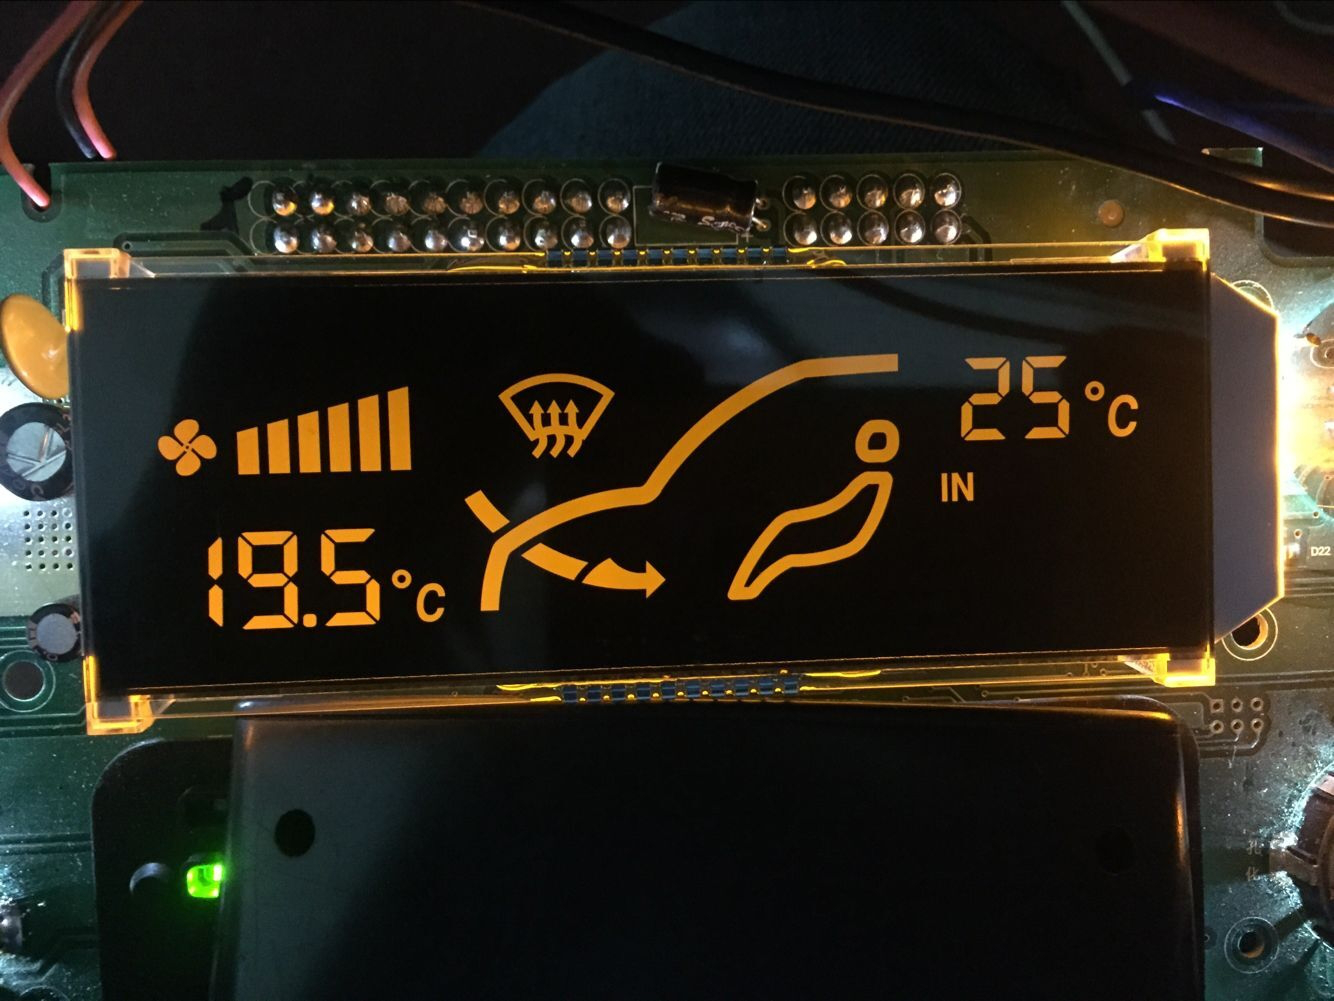 Car air conditioner controller LCD